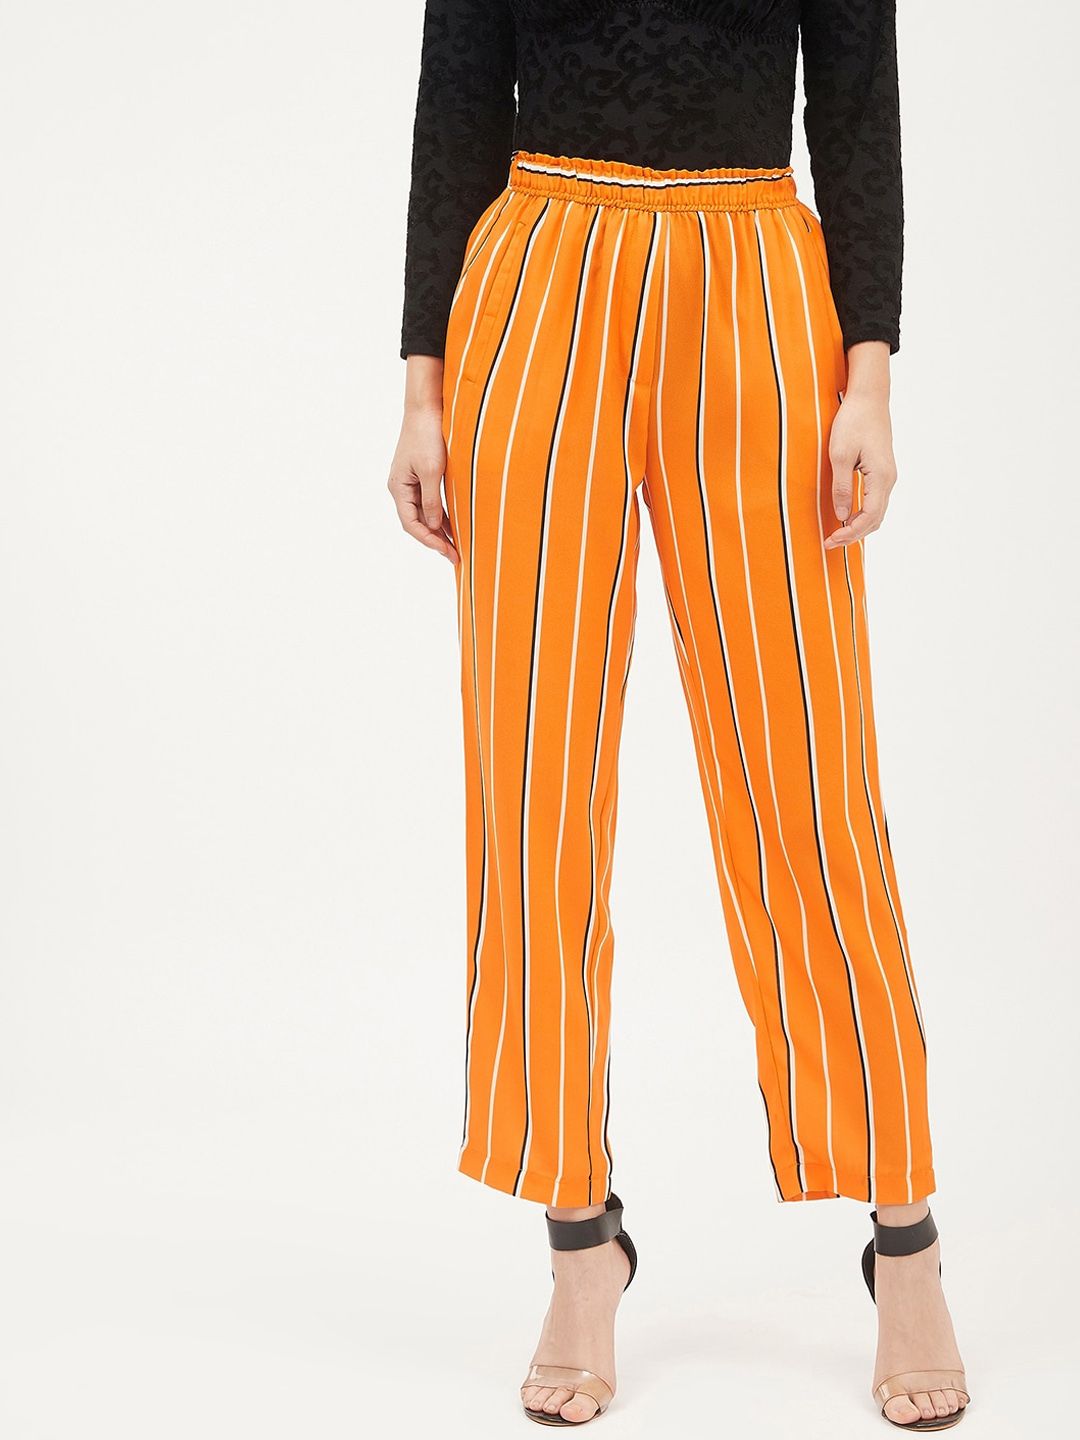 Harpa Women Mustard Yellow & White Smart Regular Fit Striped Trousers Price in India